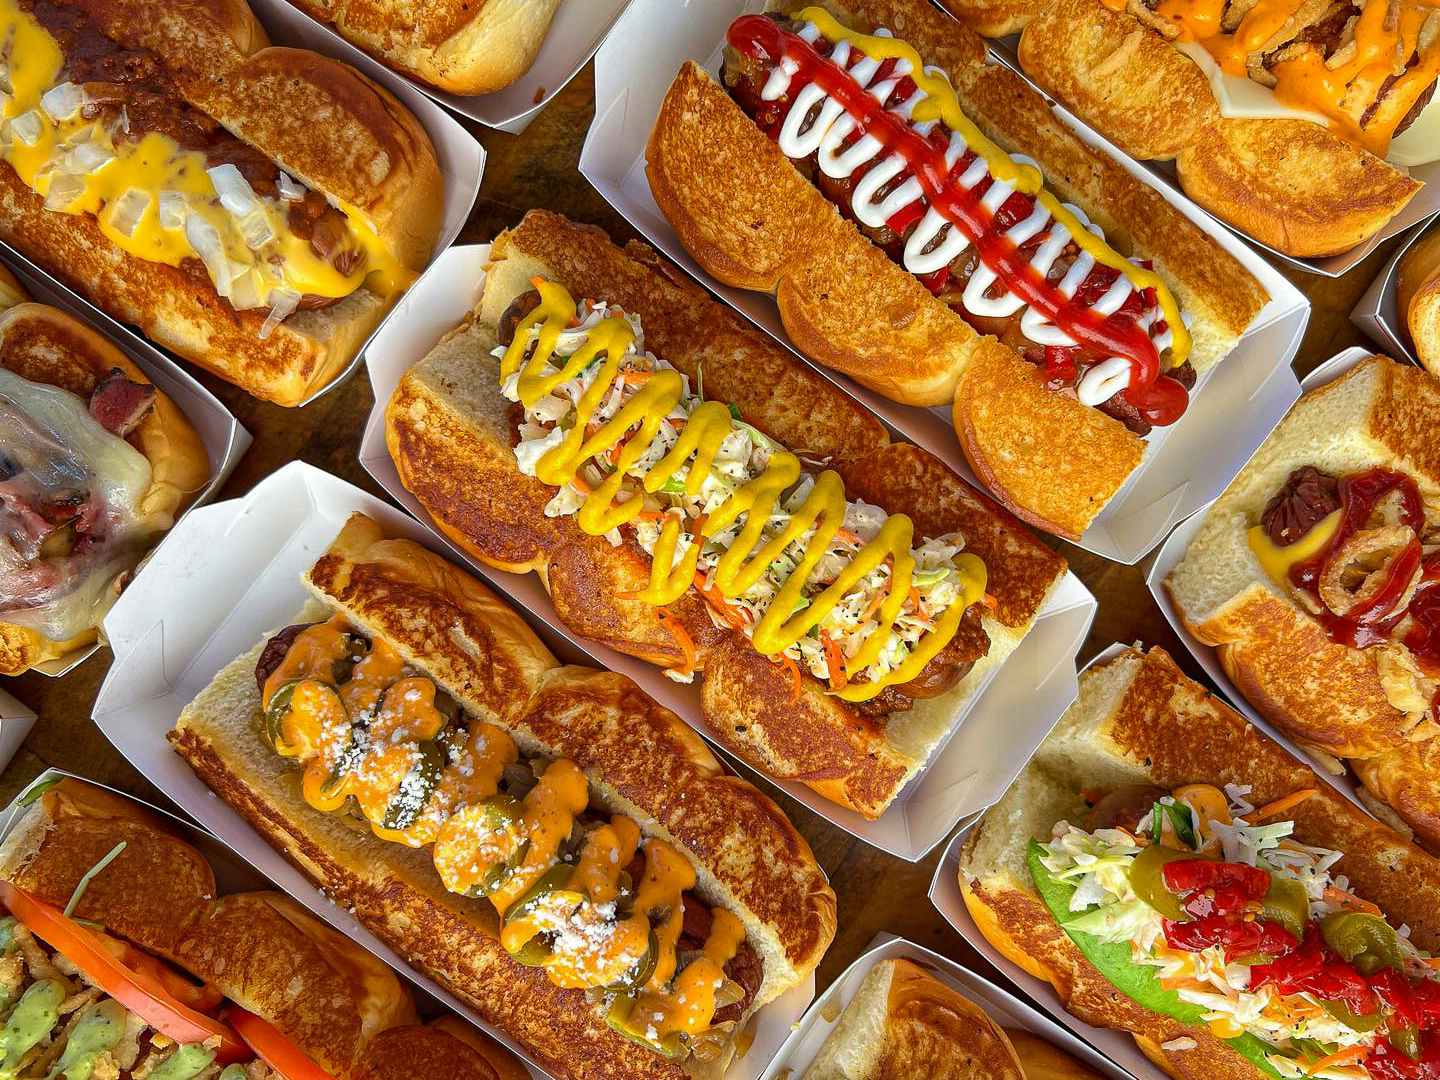 Zippity Do Dog will offer a free hot dog to all Veterans Wednesday.